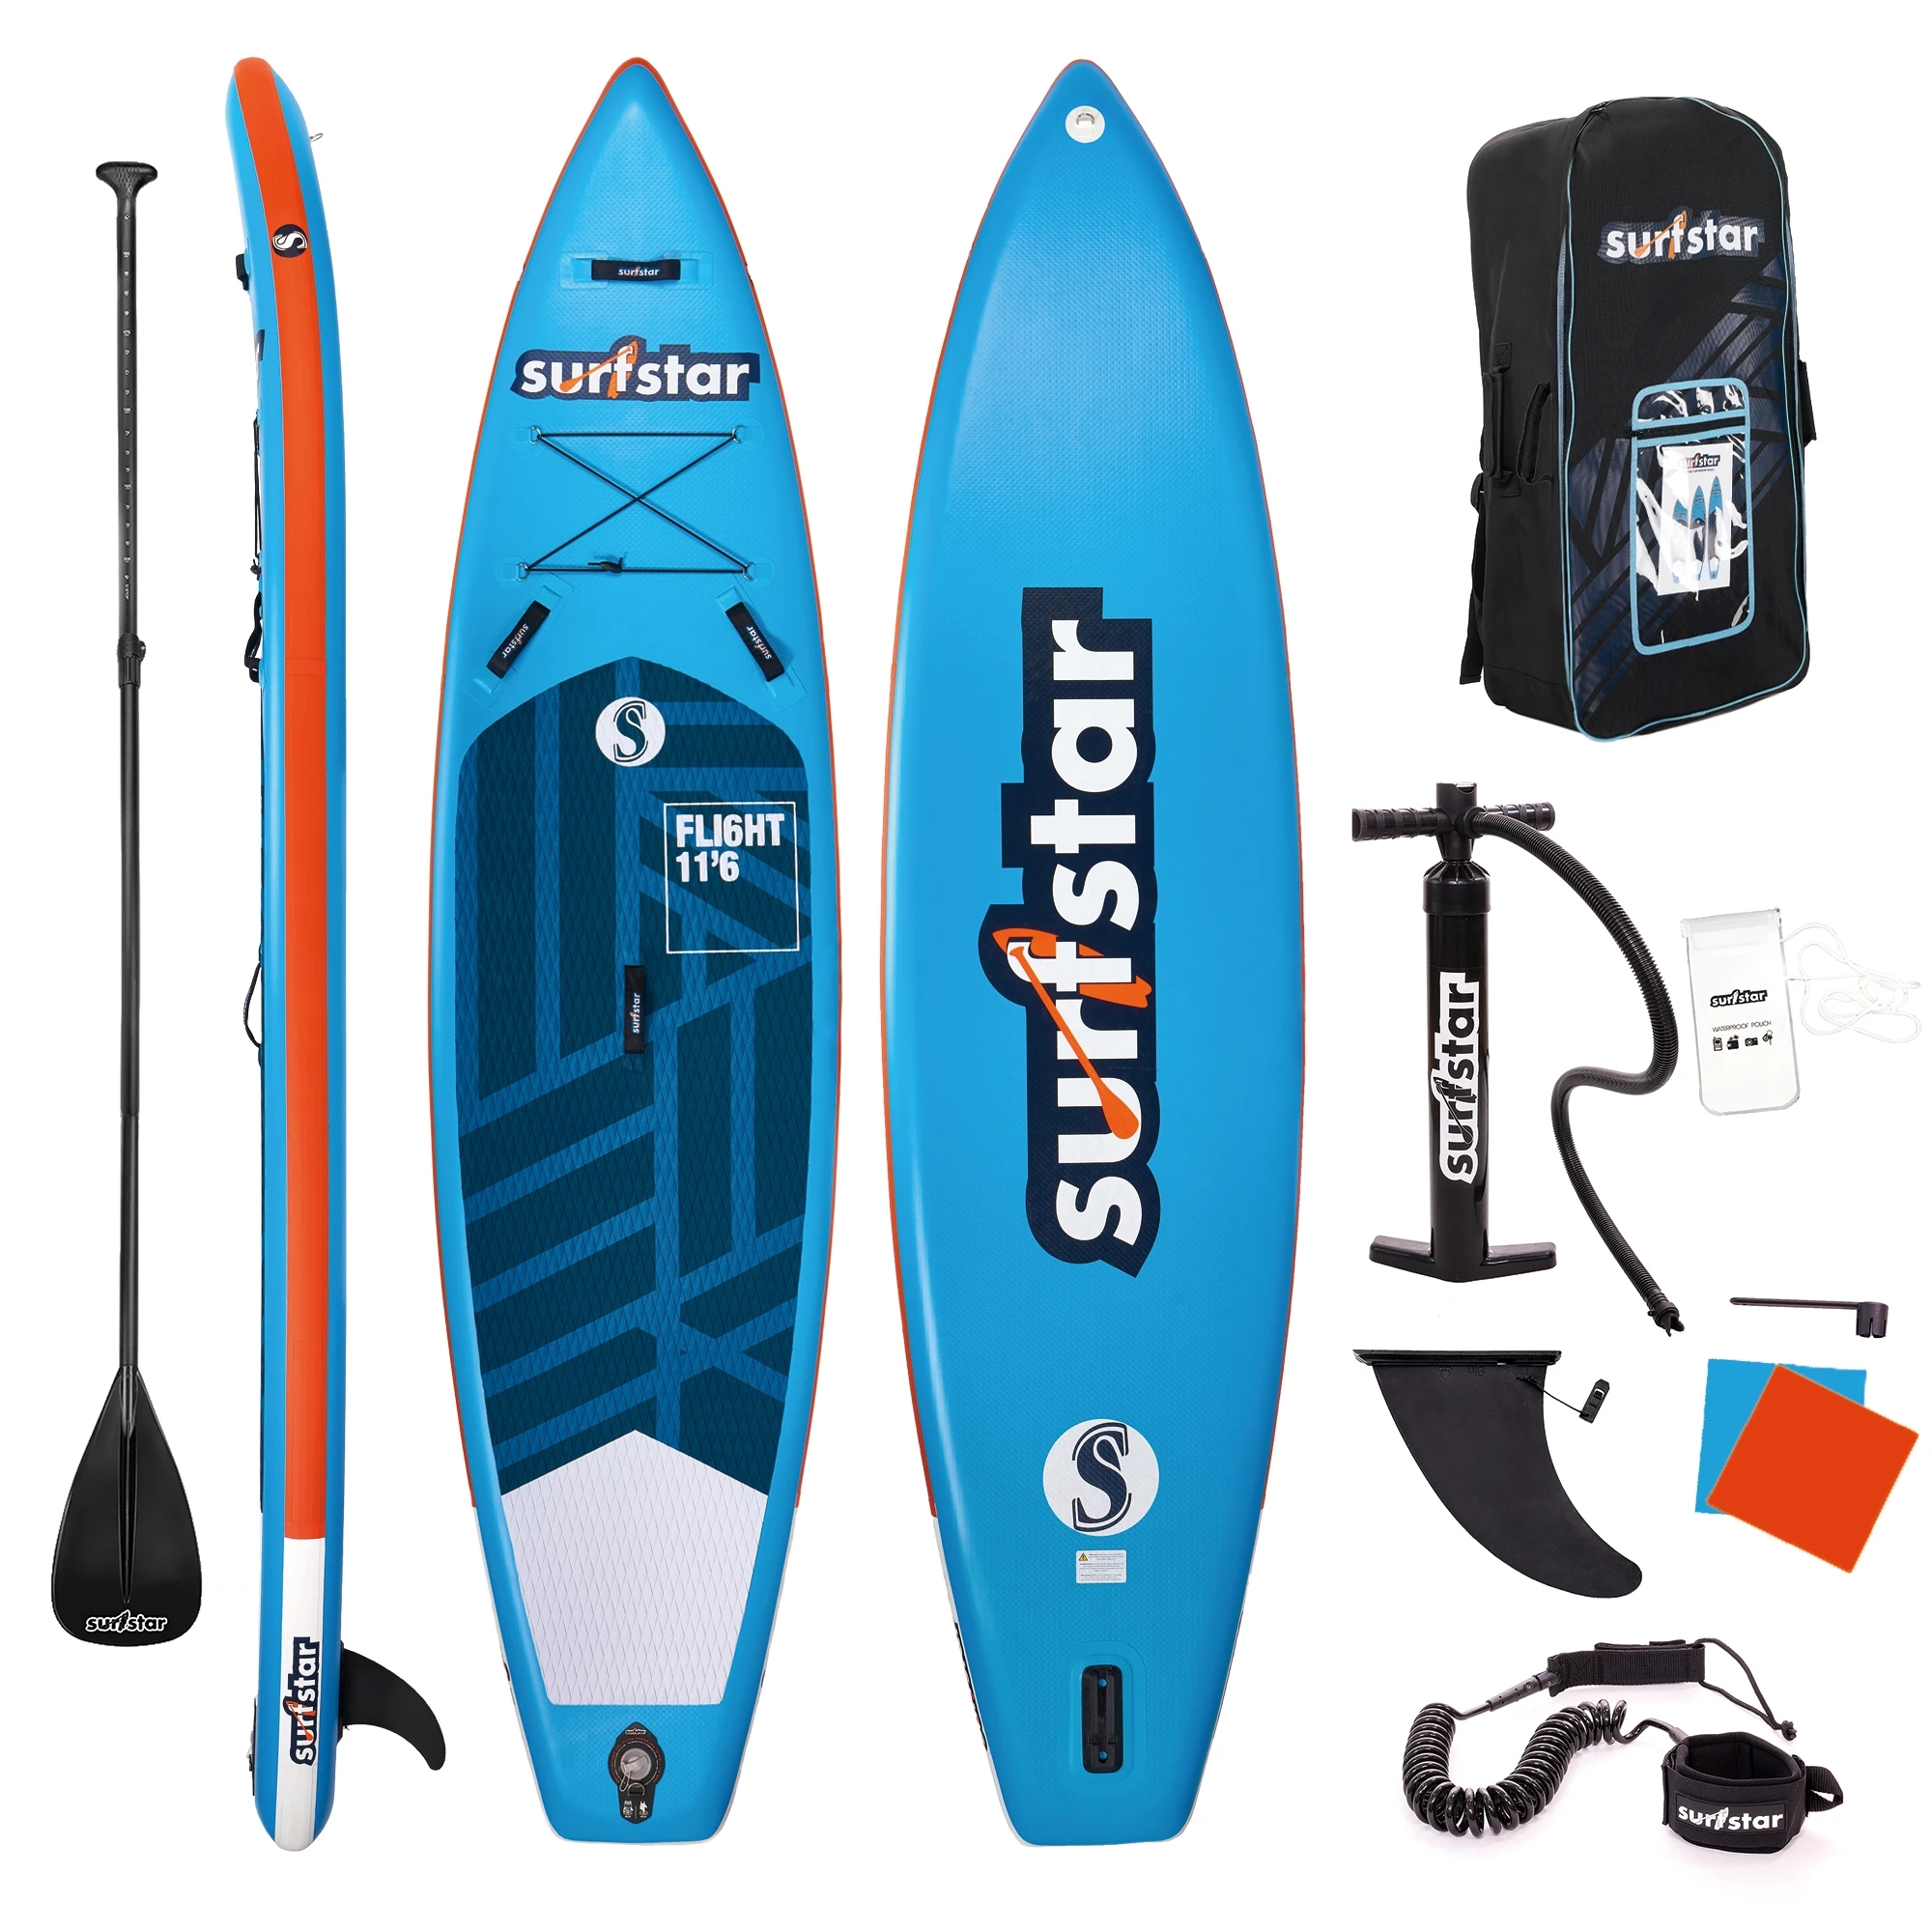 Surfstar SUP 11'6 x 33' x 6' SUP Stand Up Paddling Board